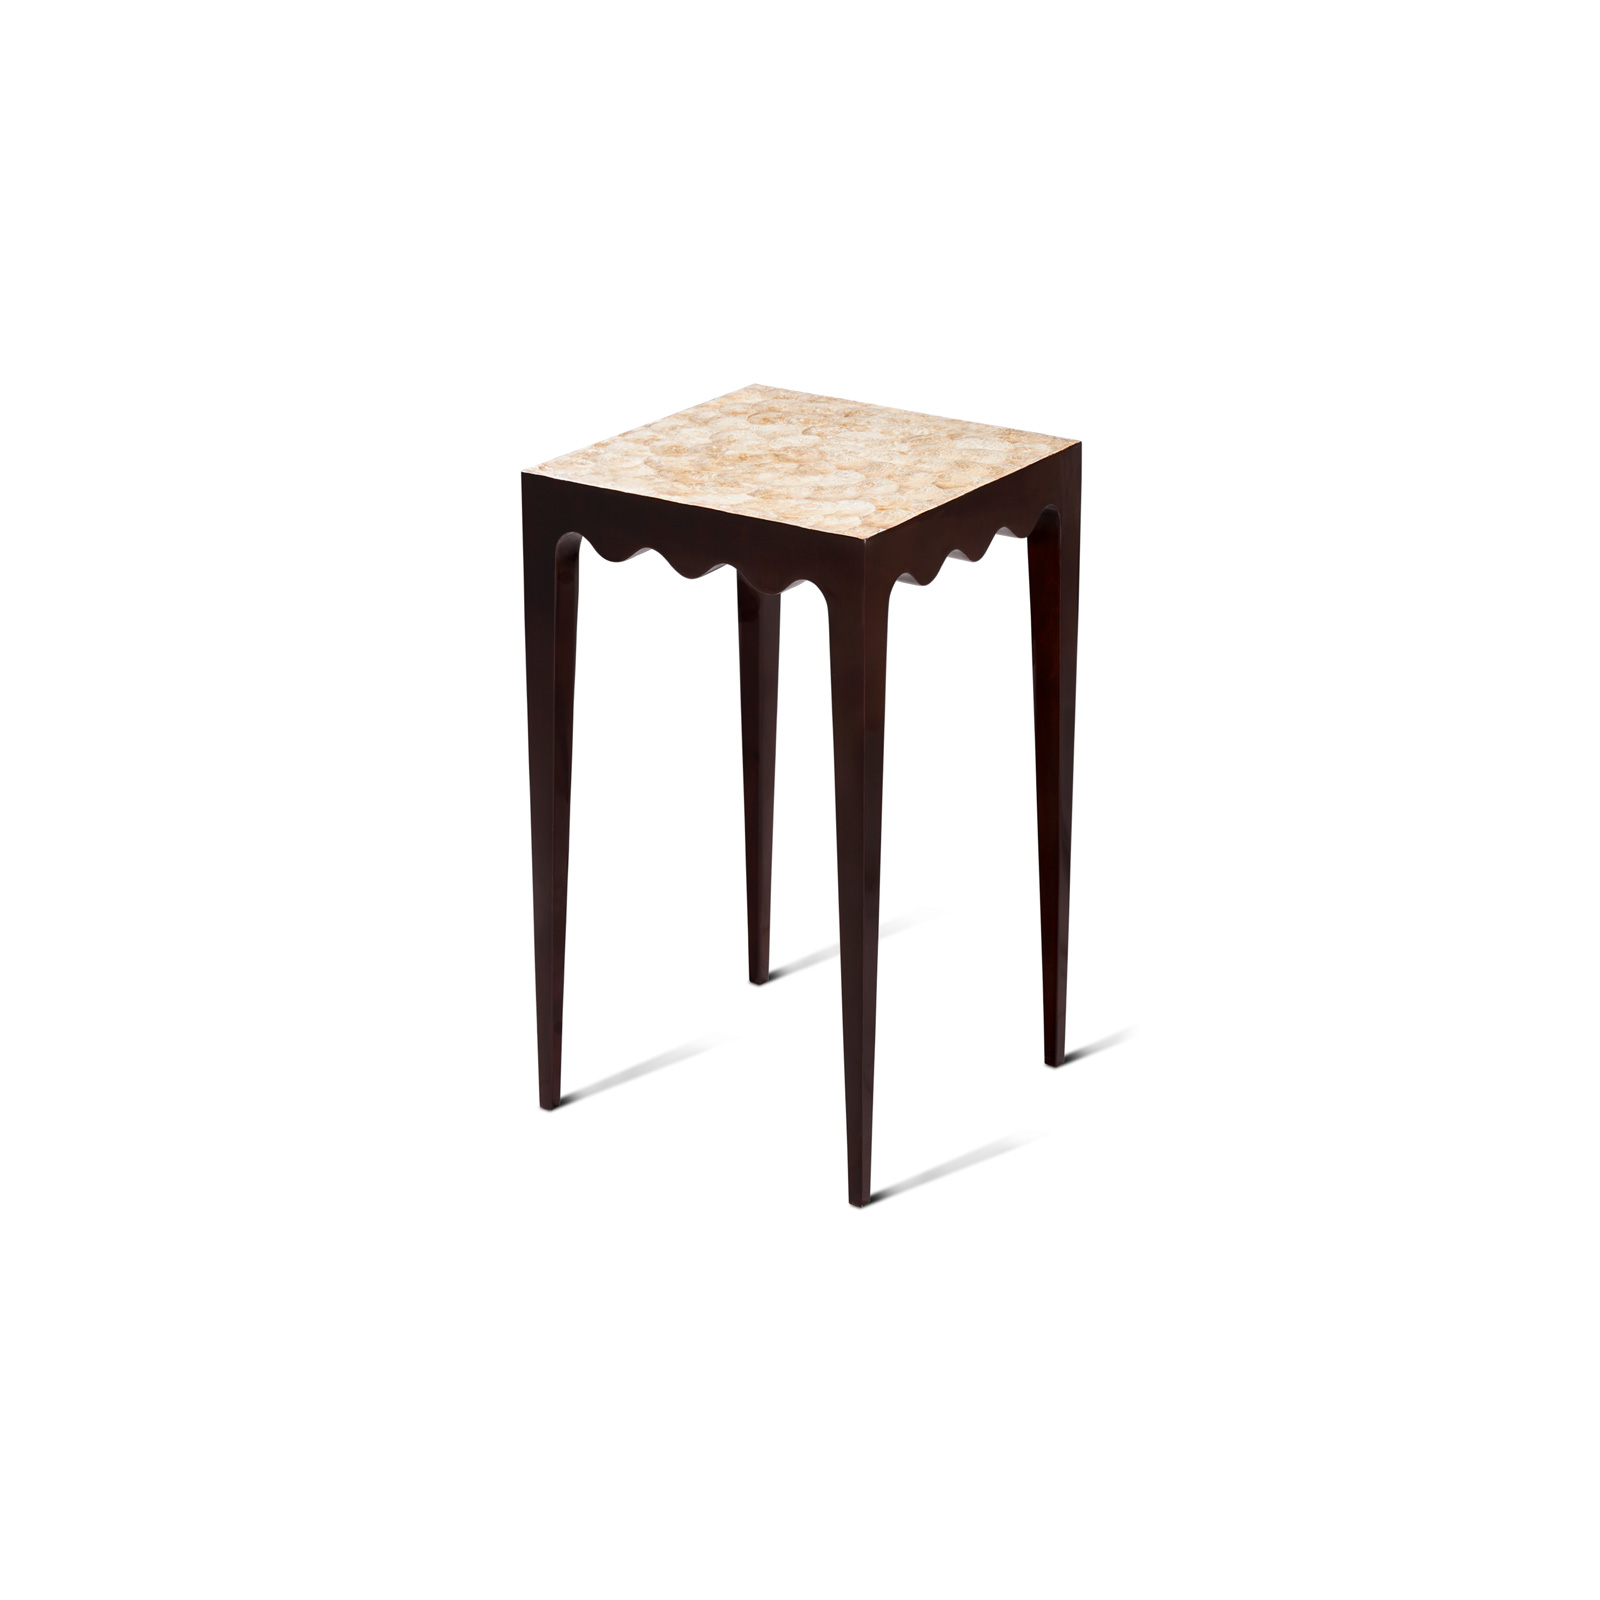 Tapered 4 leg square accent table with scalloped apron in Bergamo Maple Finish and hand inlaid Gold Capiz Shell top.